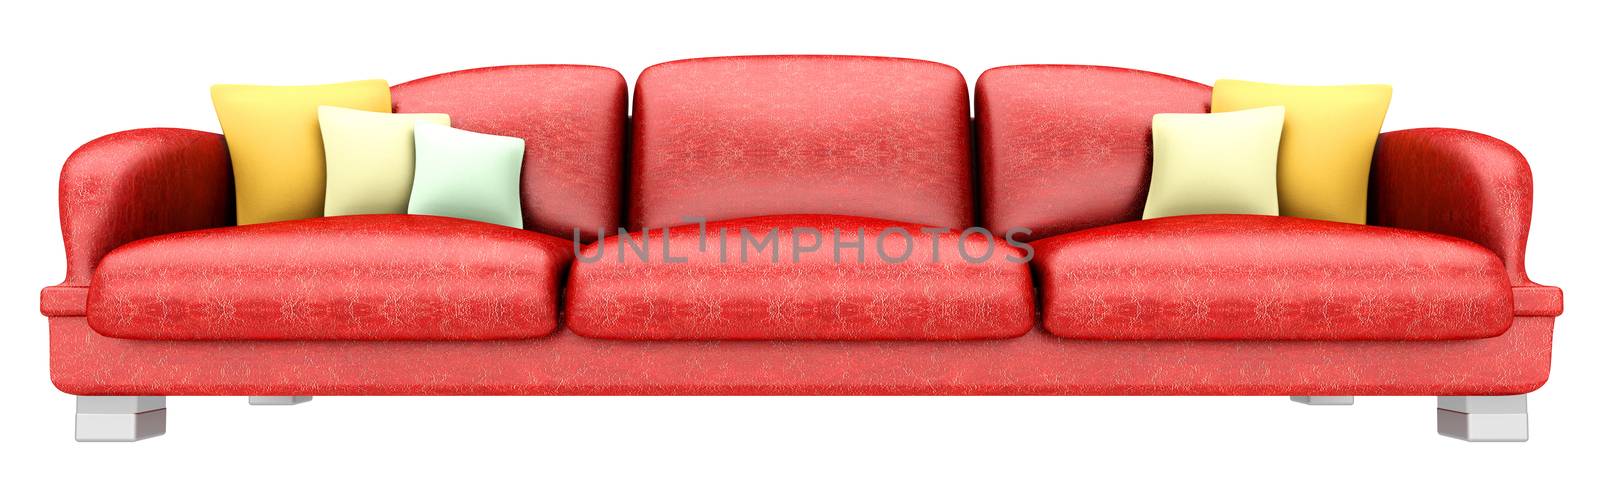 A Sofa with a Table. 3D rendered Illustration. Isolated on white.